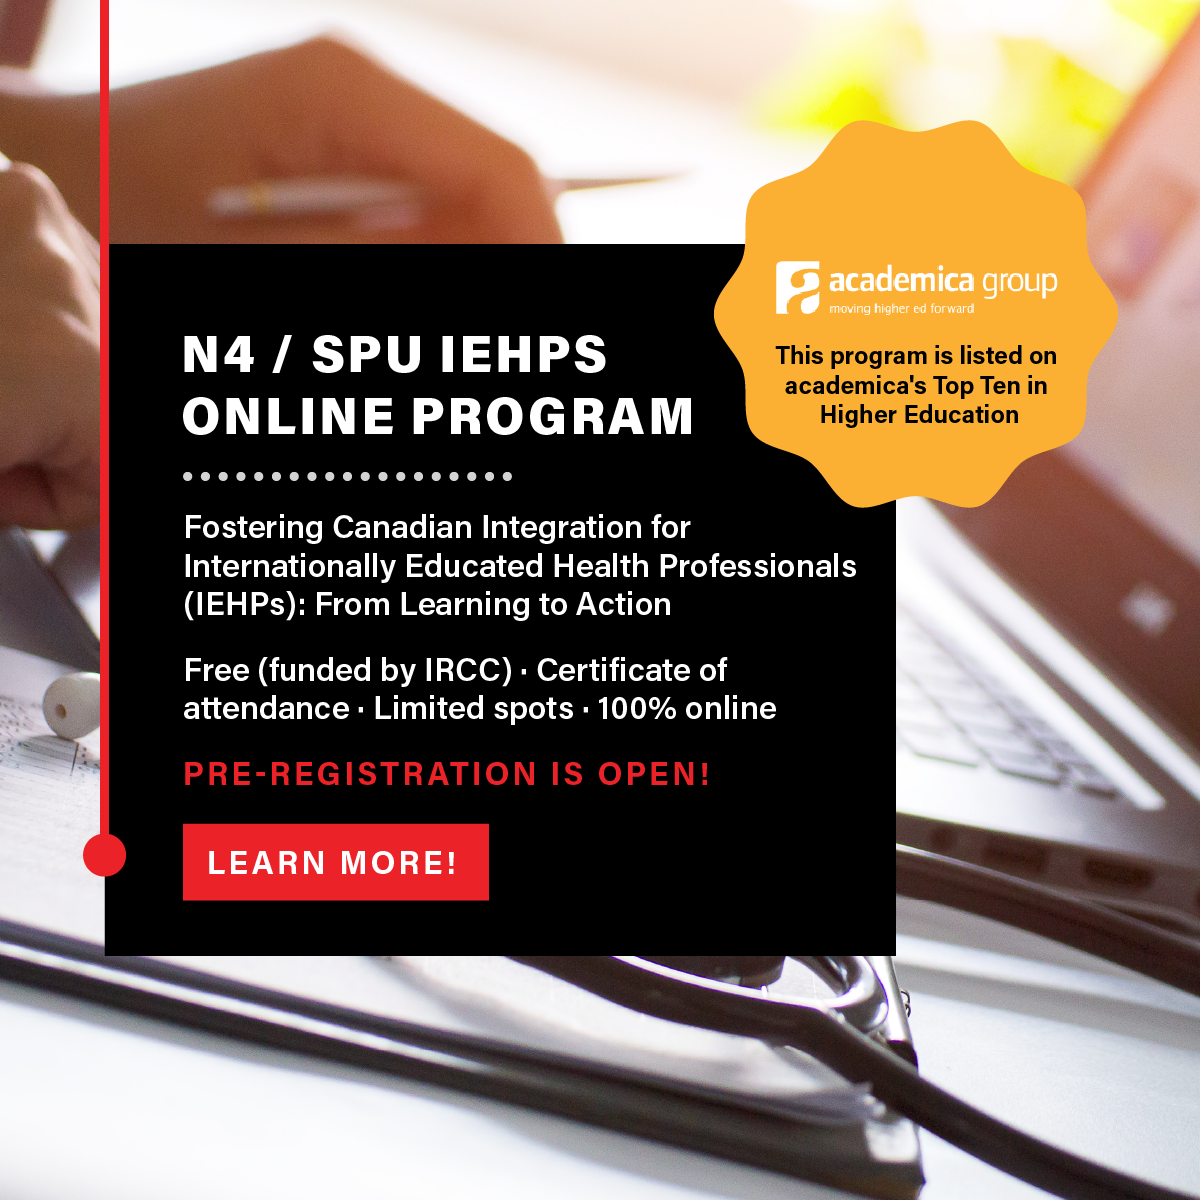 Graphic that gives information about the online N4 / SPU program